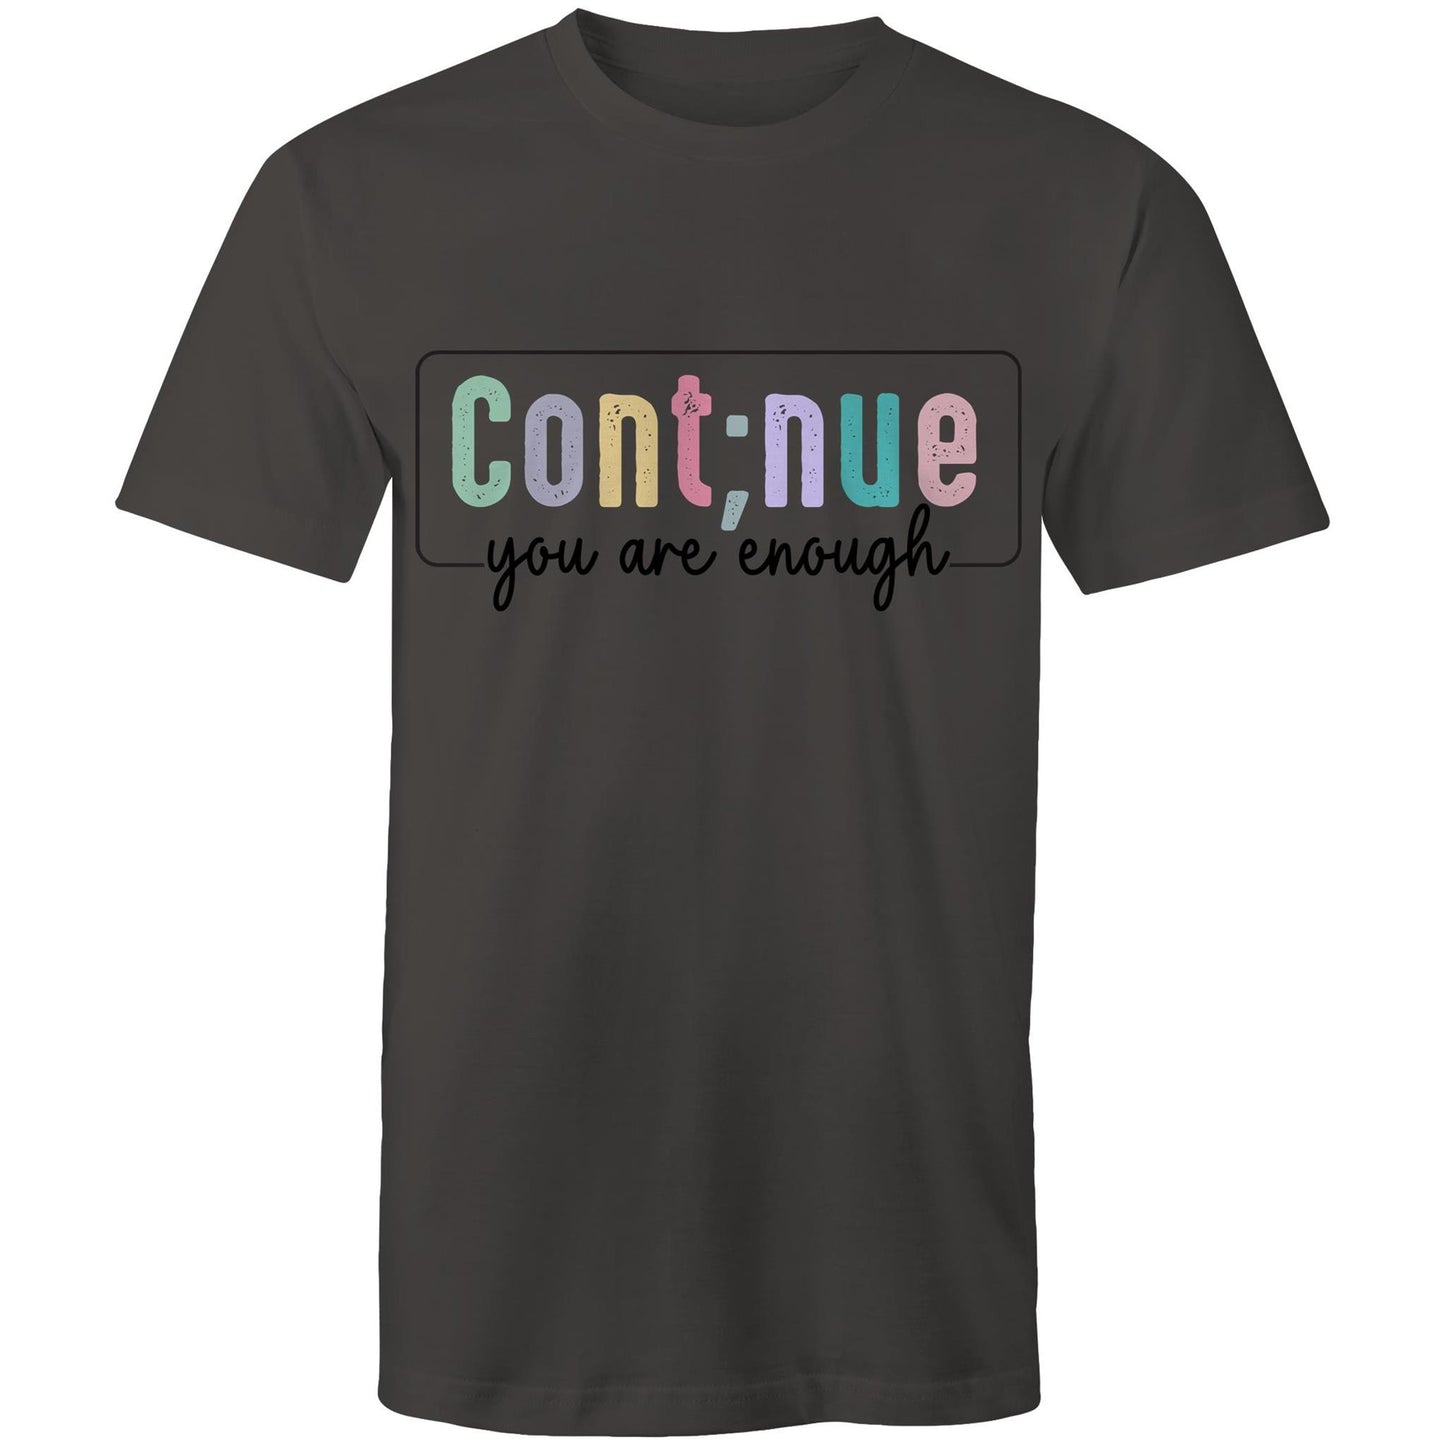 Mens T-Shirt - Continue you are enough